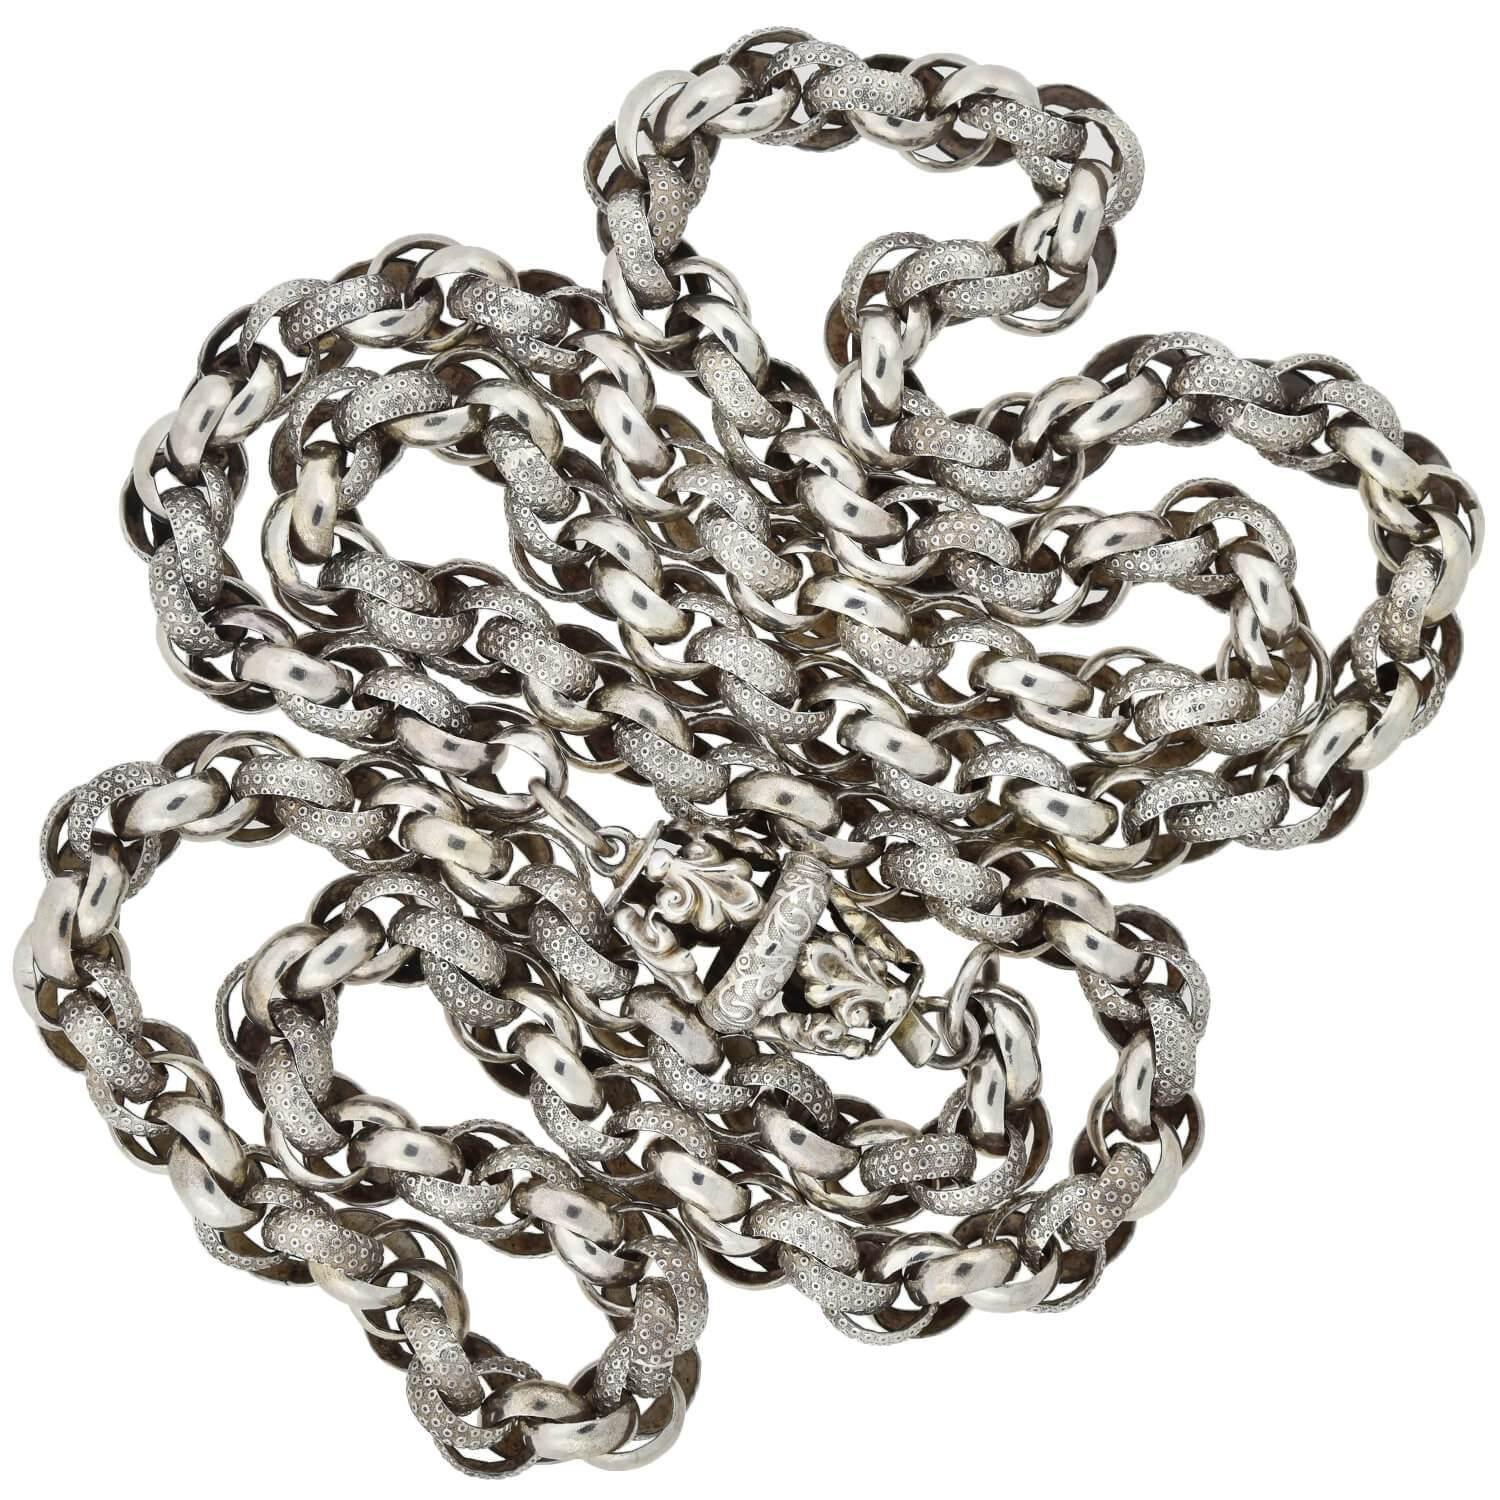 A stunning textured link chain from the Georgian (ca1830s) era! This beautiful handmade piece is crafted in sterling silver and comprised of interlocking round links, which together form a gorgeous twisted rope design. Half of the links feature a